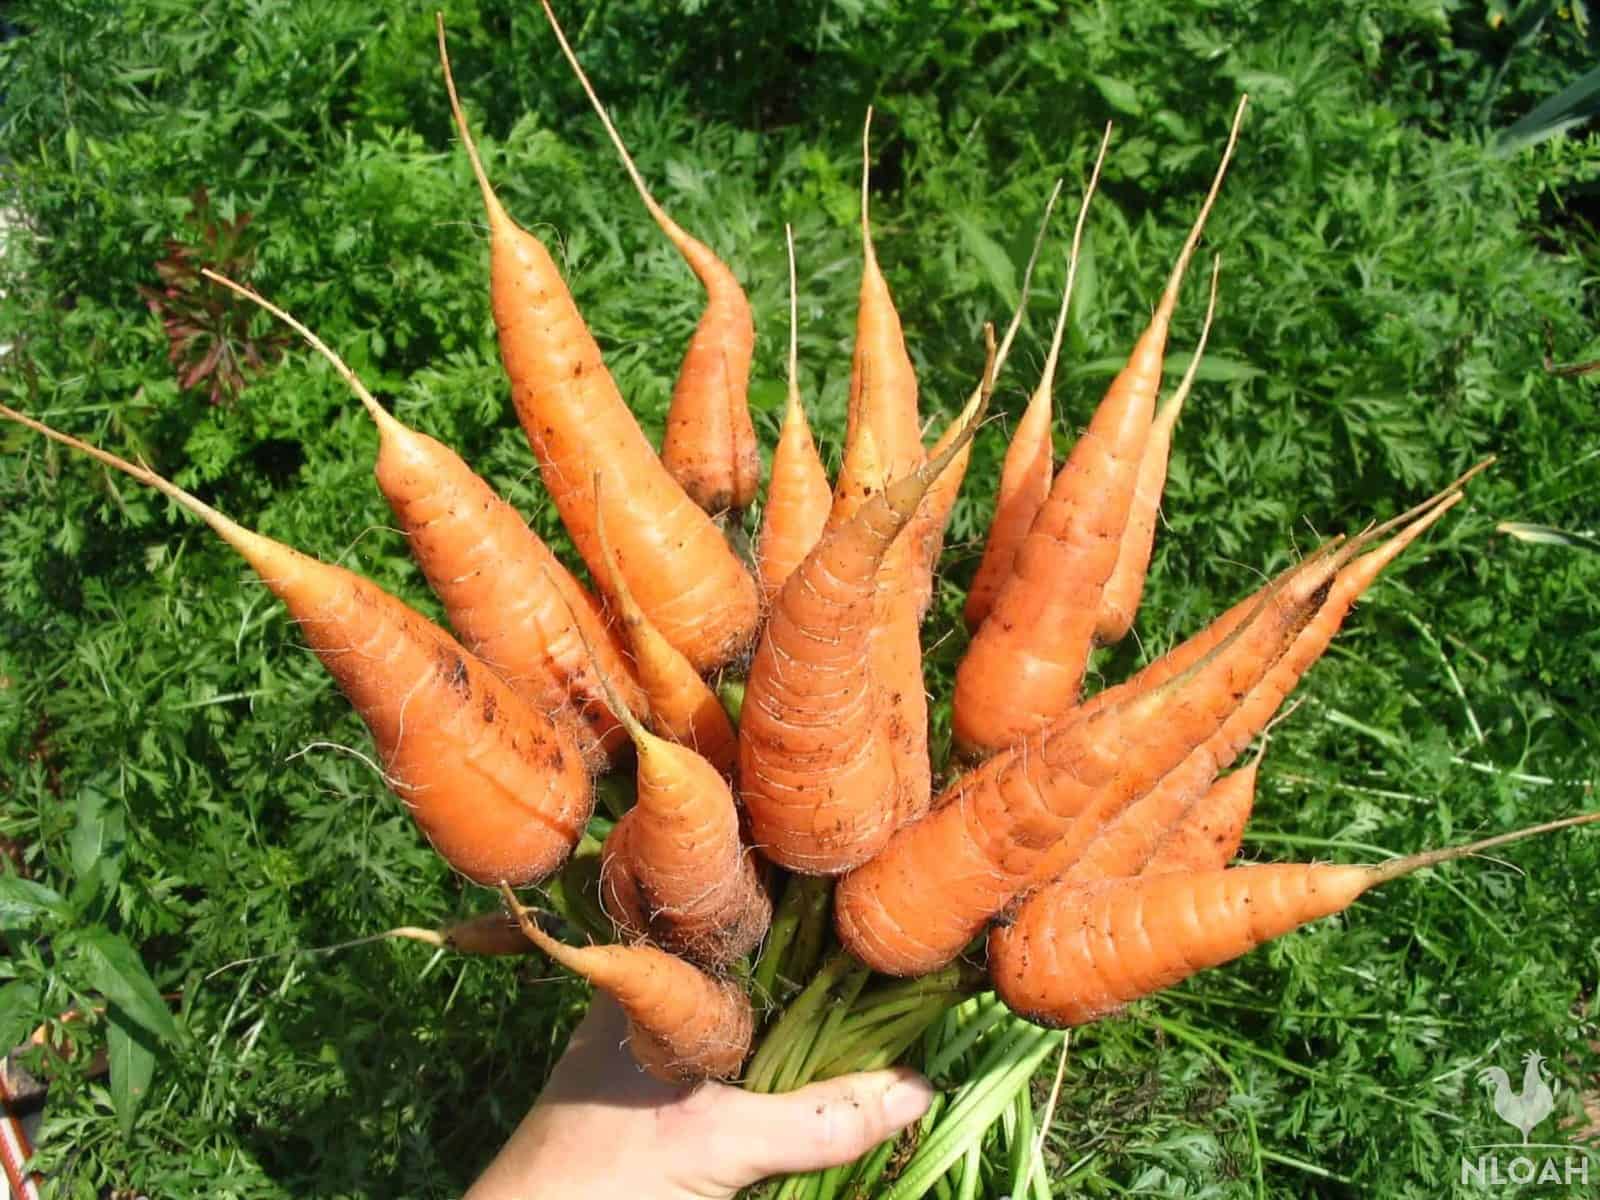 harvested carrots being held in hand